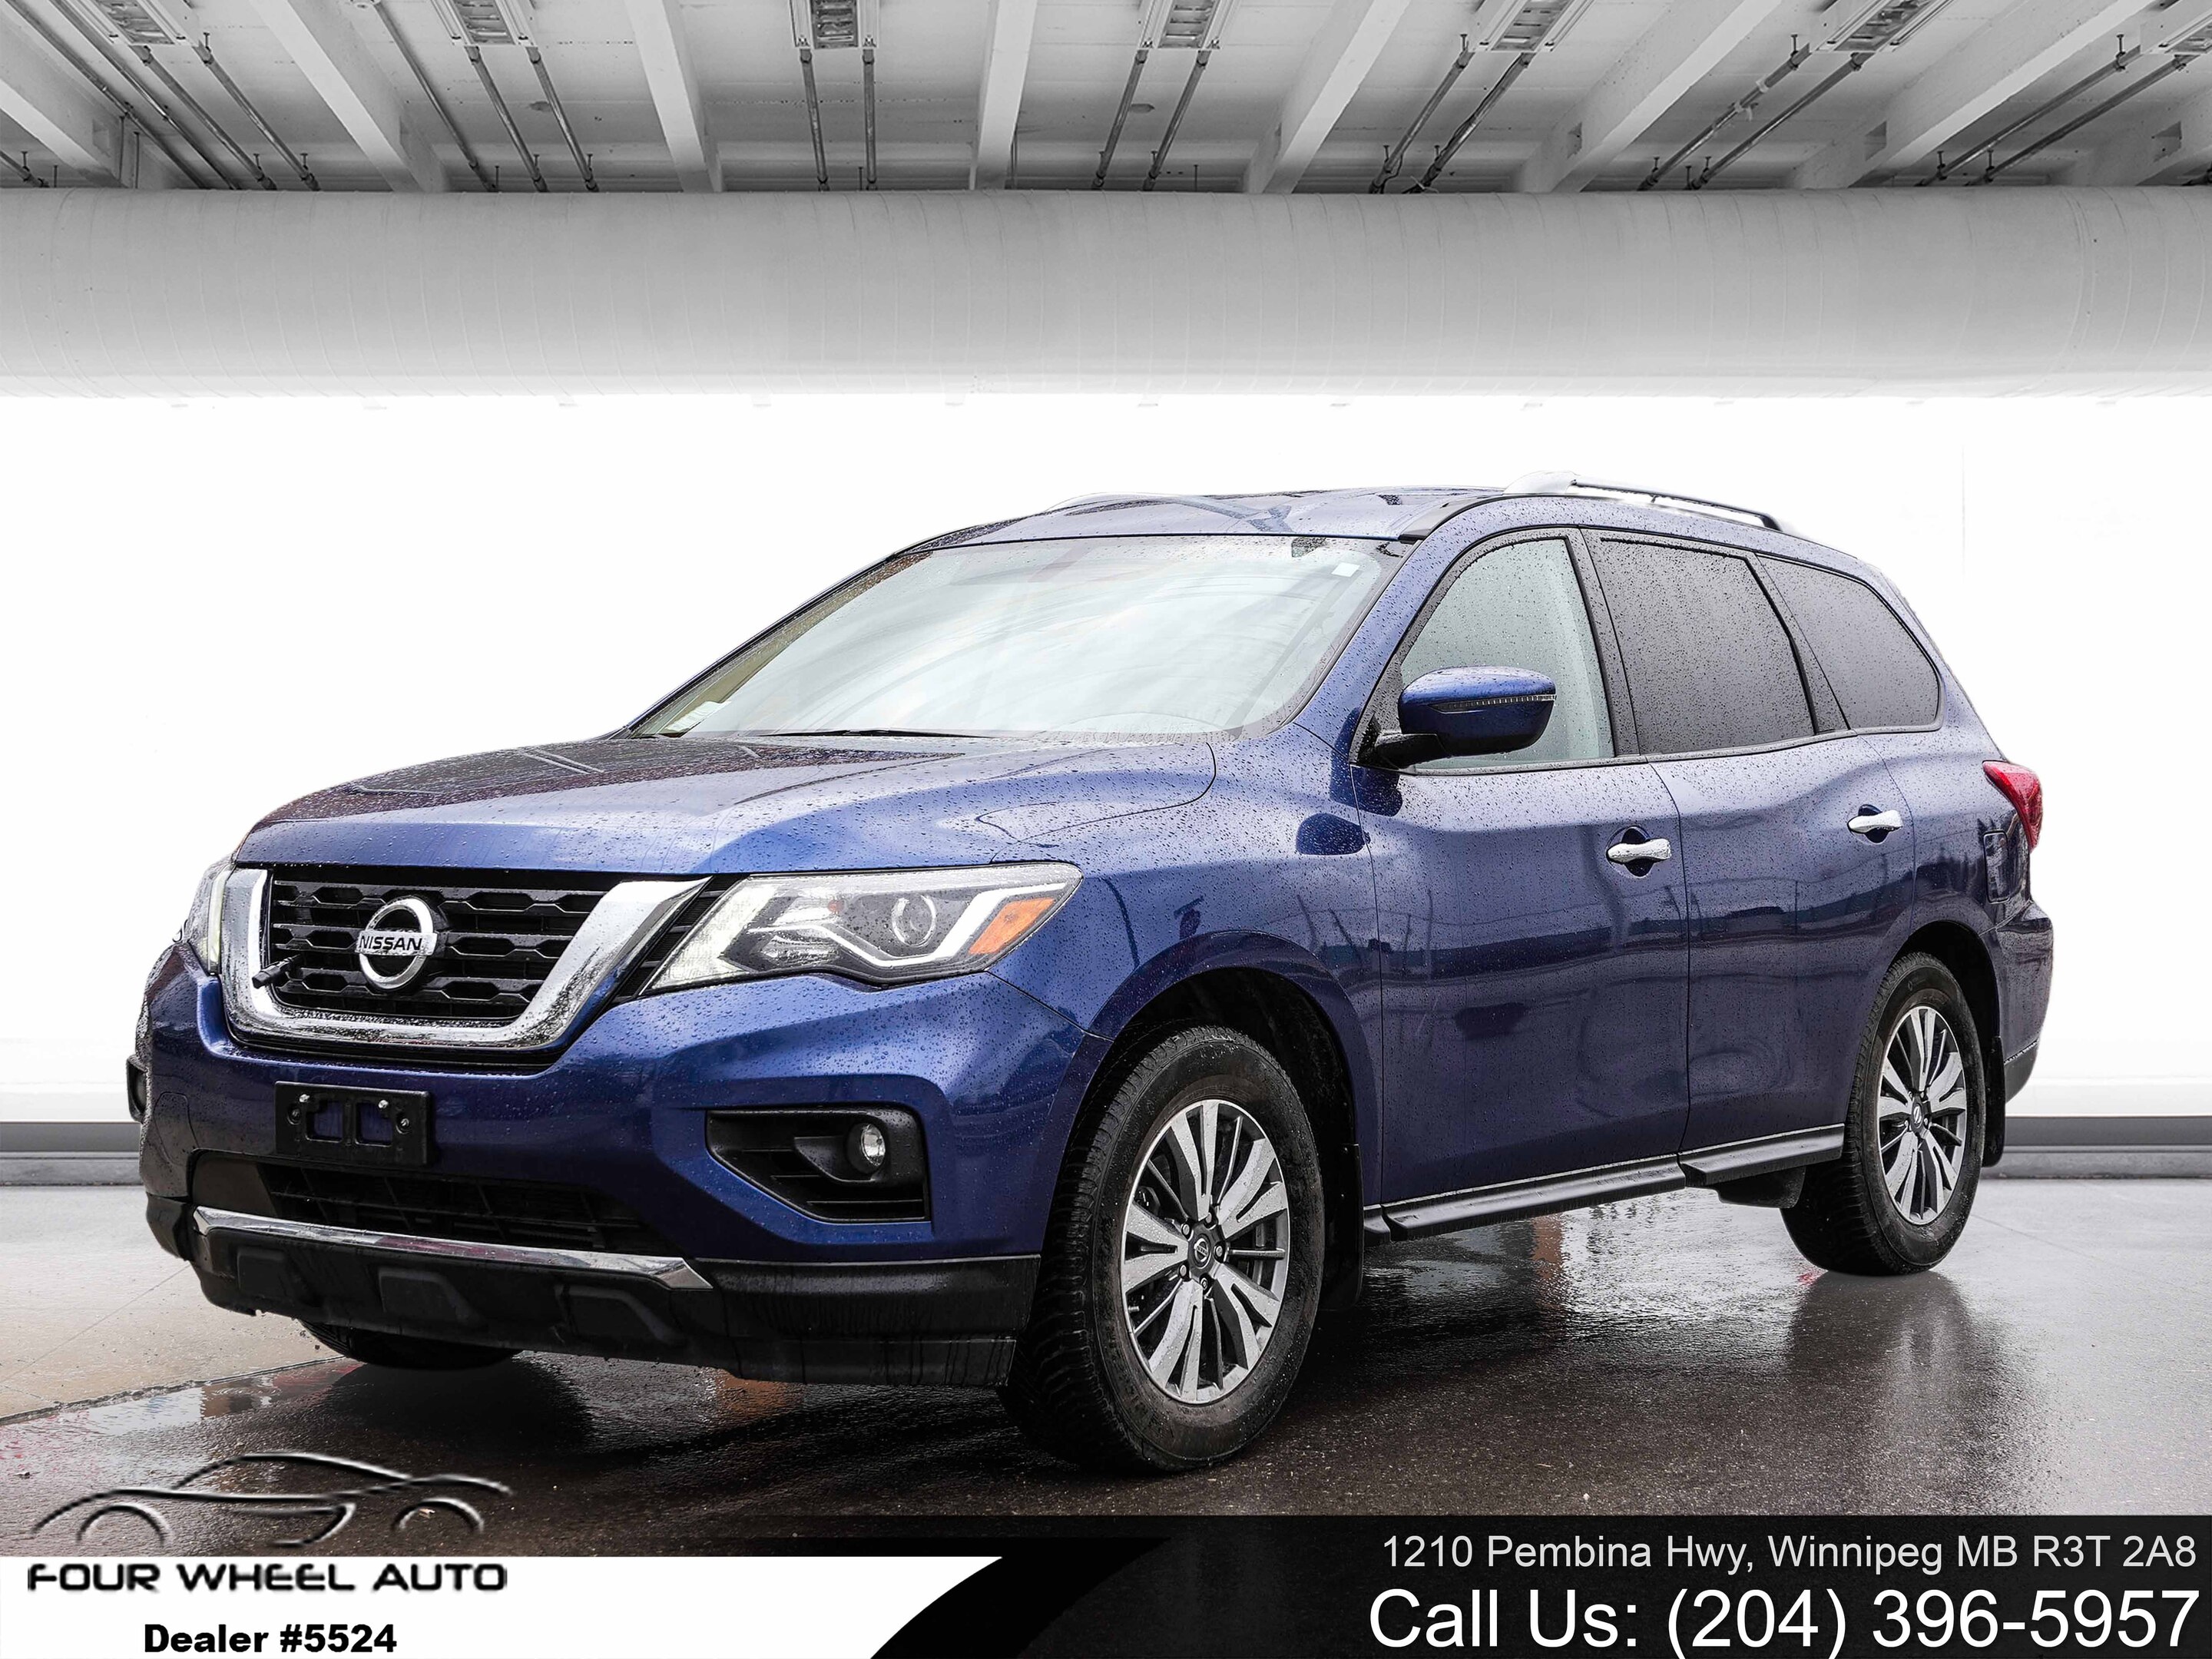 2018 Nissan Pathfinder 4x4 SV |No accident|7 seats|Two Set of tires|